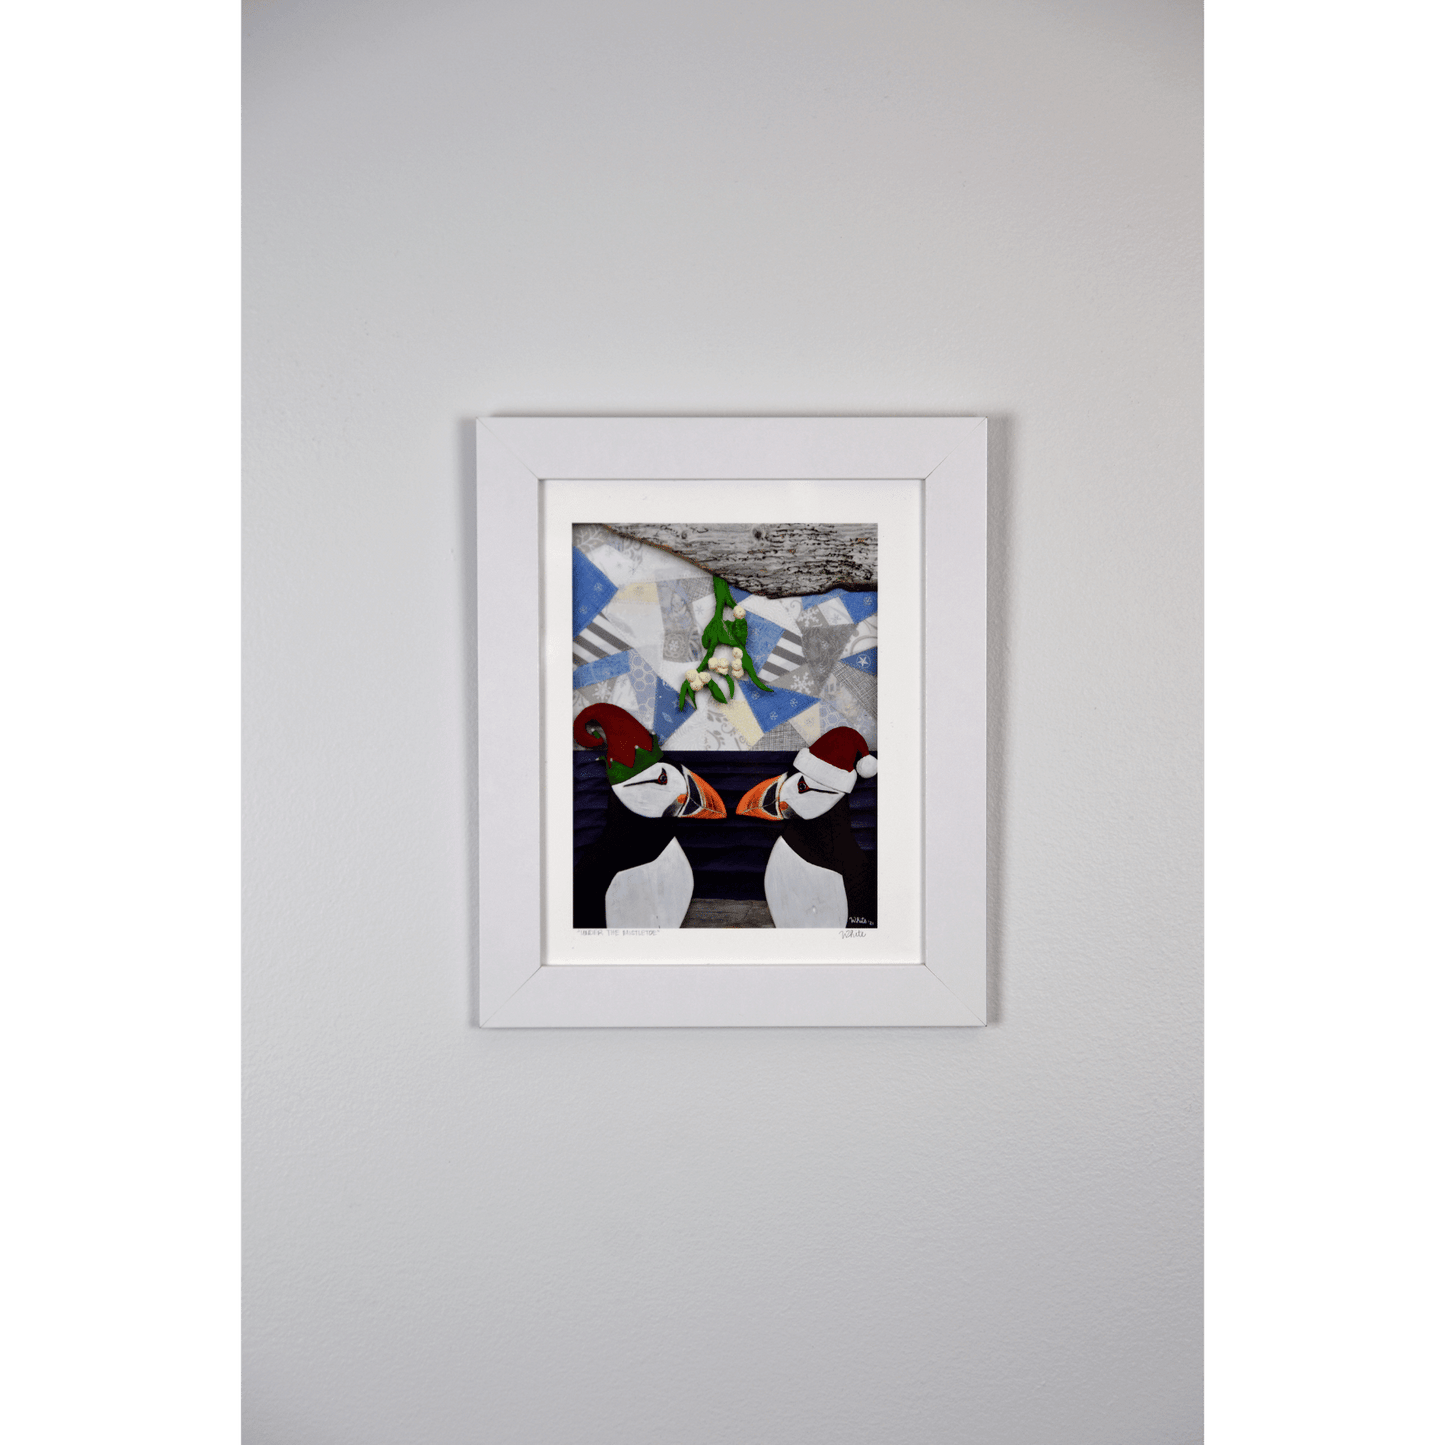  Add a playful touch to your holiday decor with our "Under the Mistletoe" print. It features 2 charming puffins in Santa and Elf hats, kissing under a mistletoe.